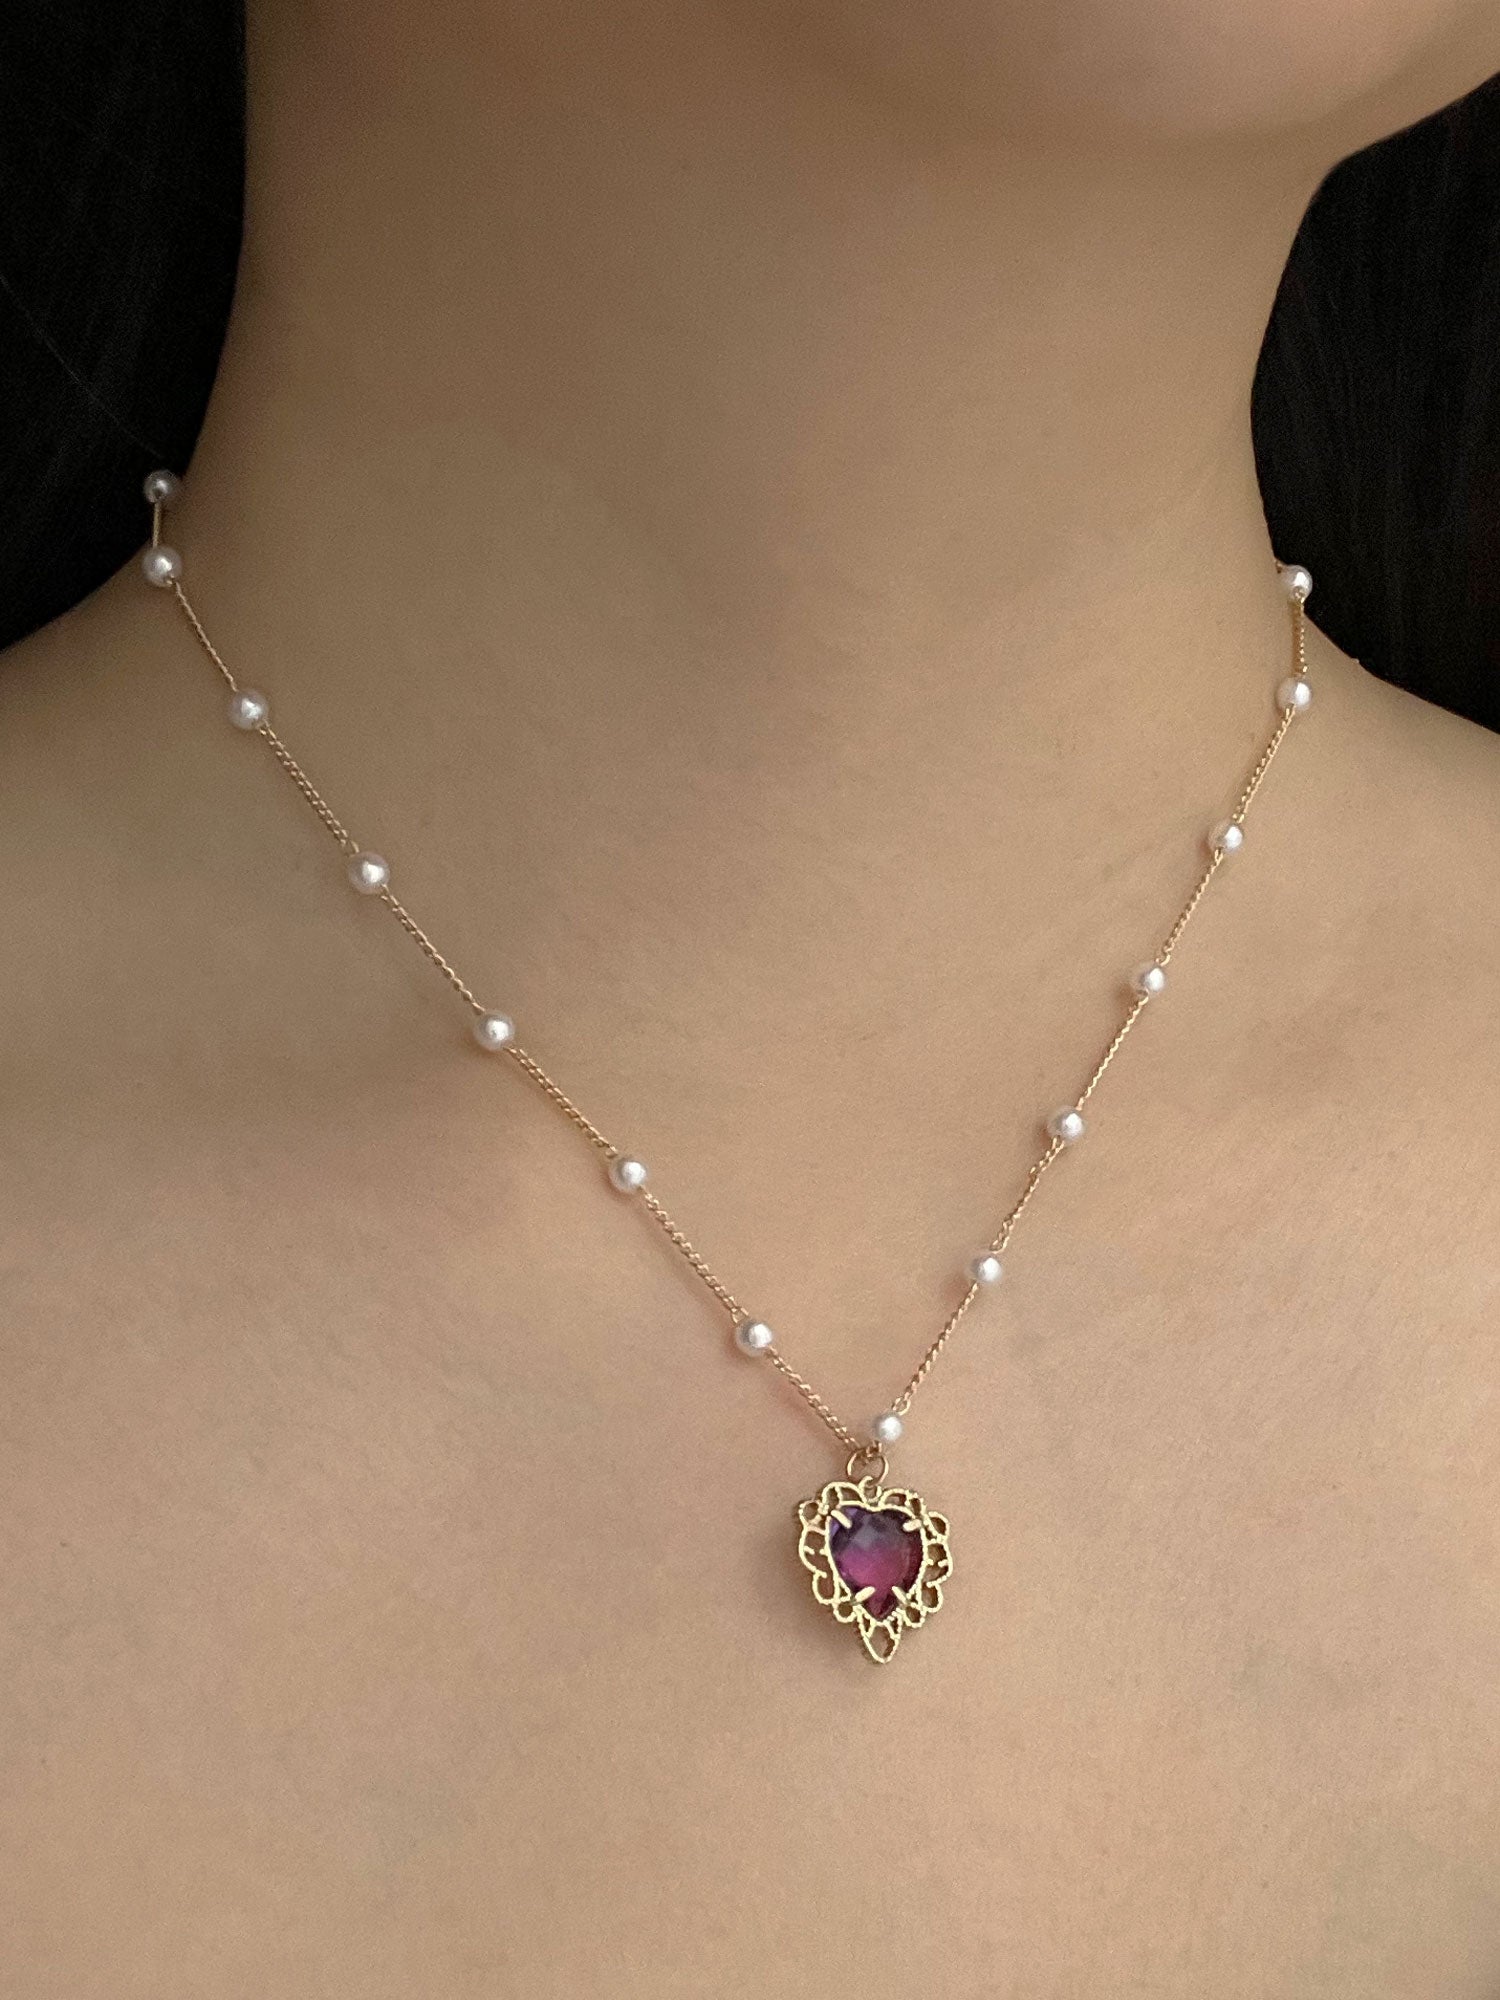 Pearl Necklace with Purple Heart Charm